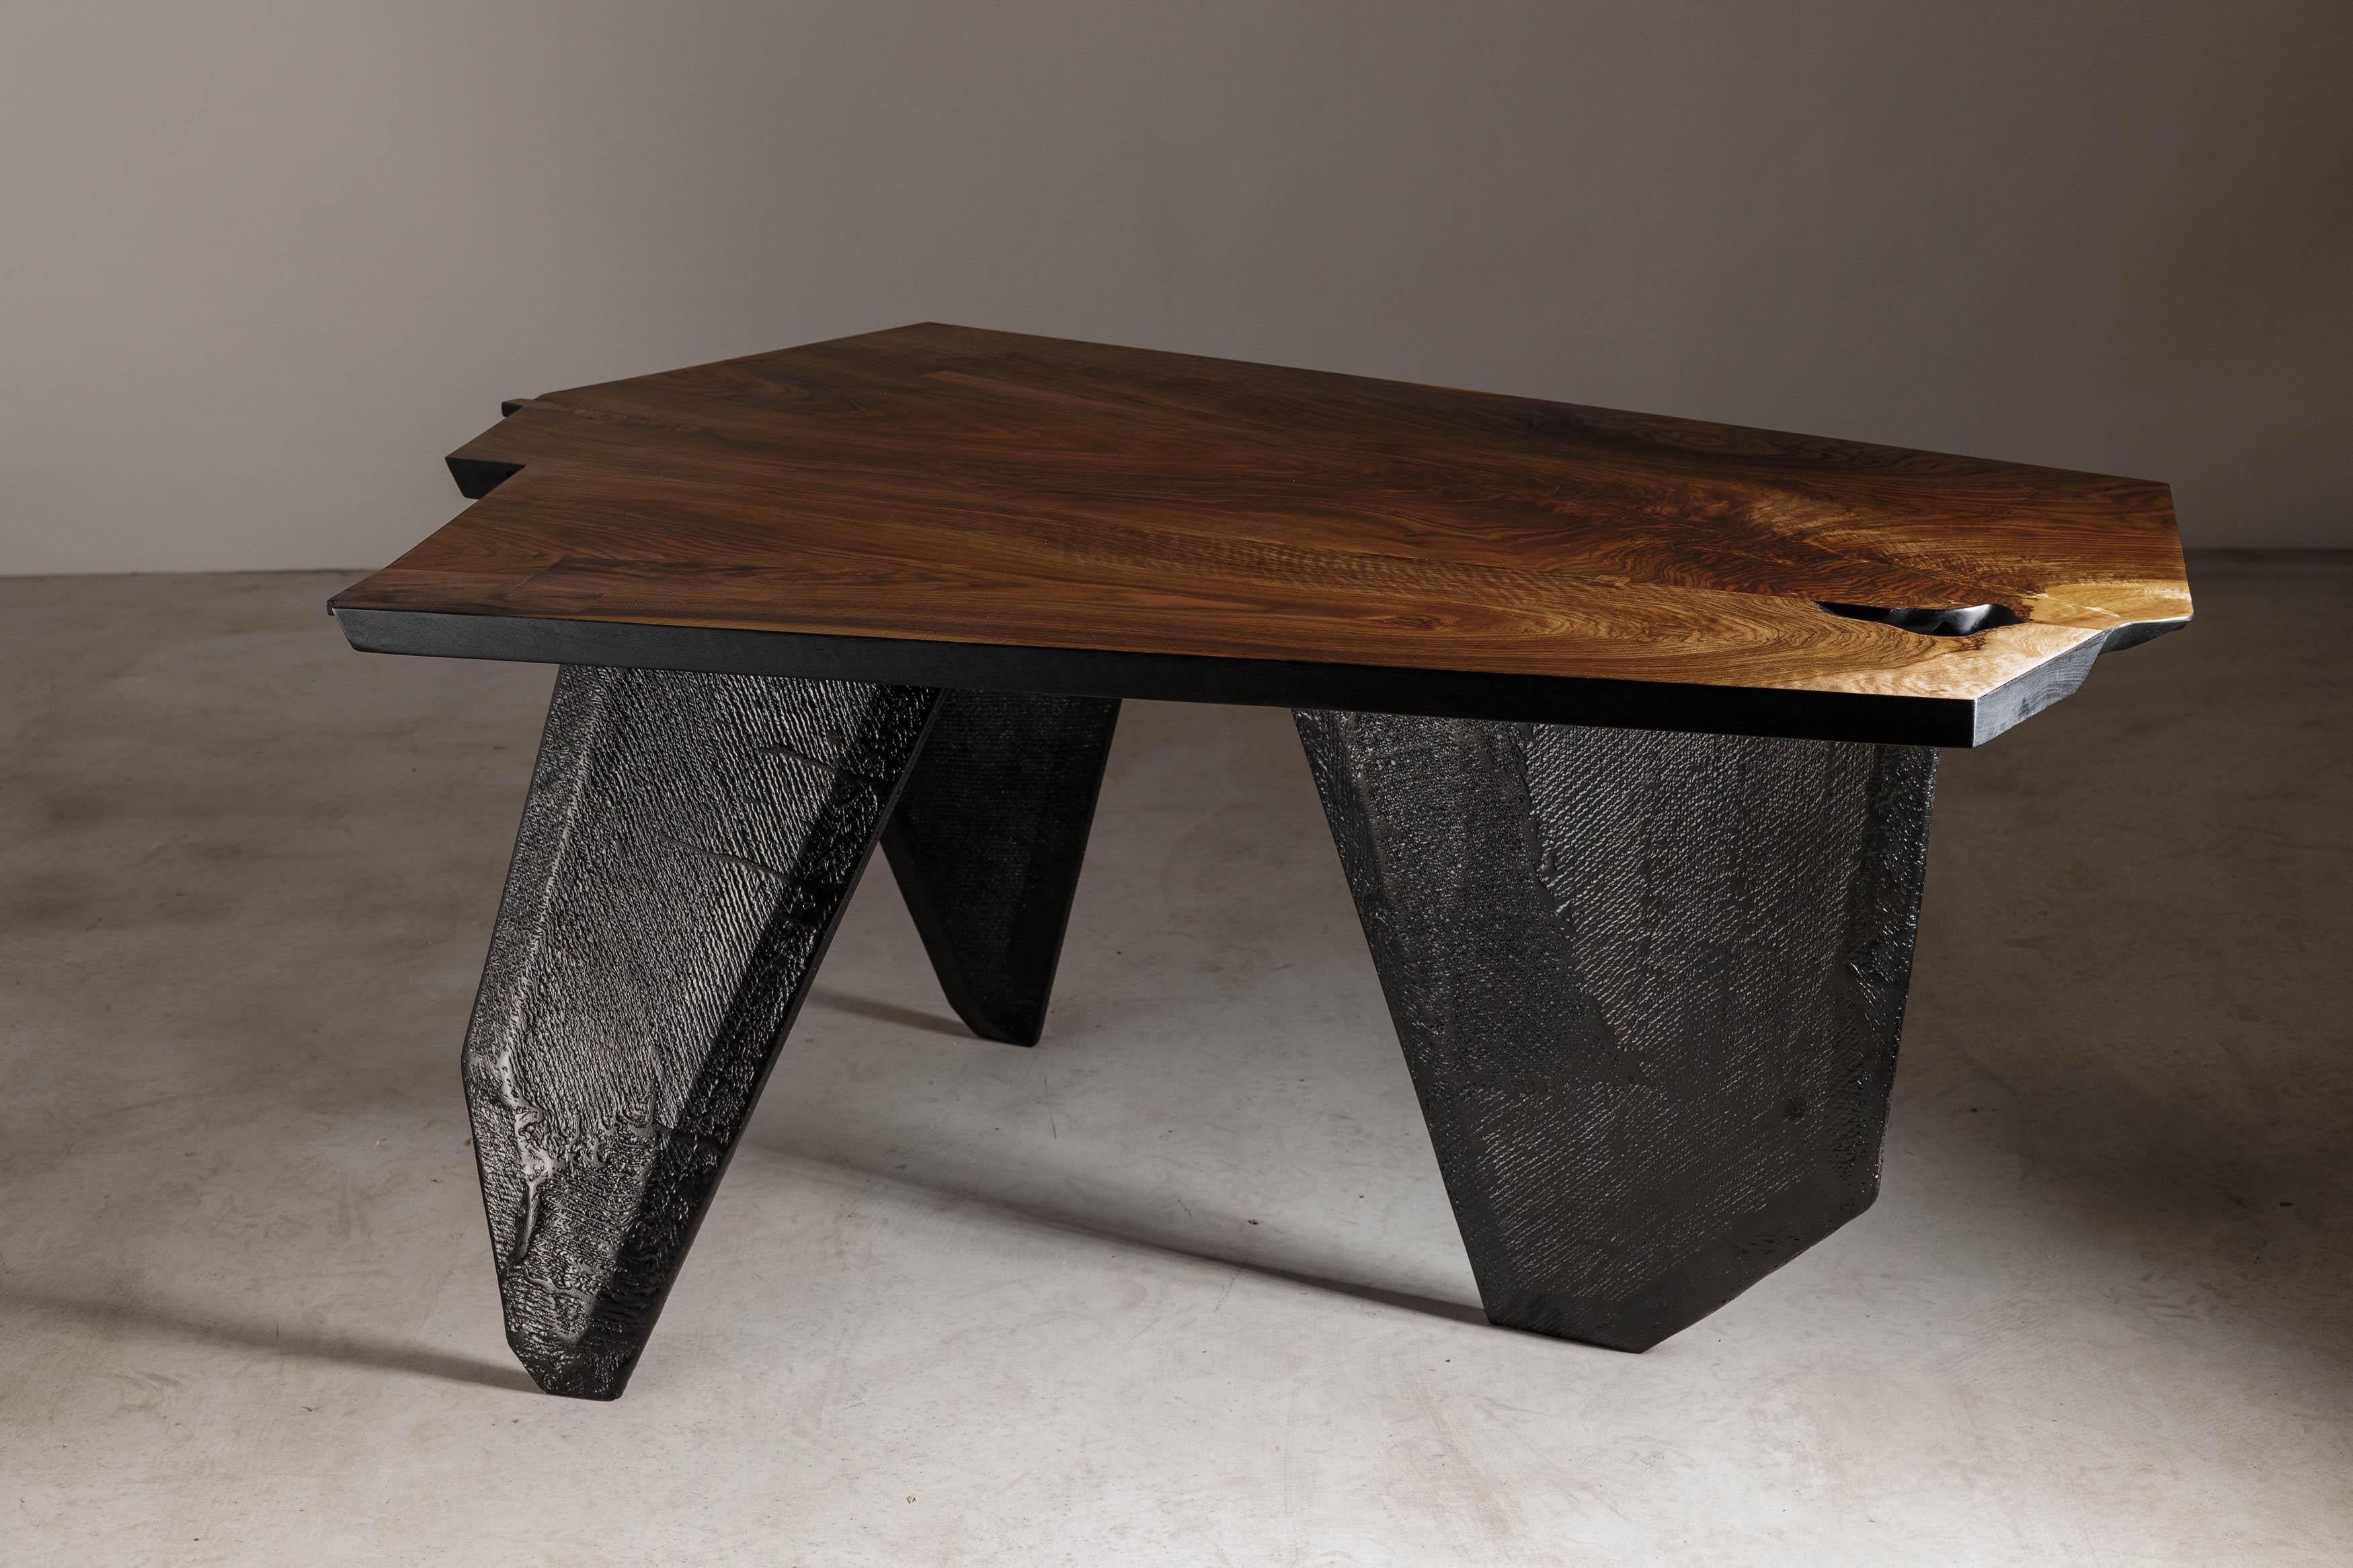 EM206 dining table by Eero Moss
One of a kind
Dimensions; W 170 x D 122 x H 77 cm
Materials: Walnut, ash, fiberglass, acrylic resin, India ink.
Finish: Natural oils.

18 Brut Collection

The latest collection by the artist is a tribute to